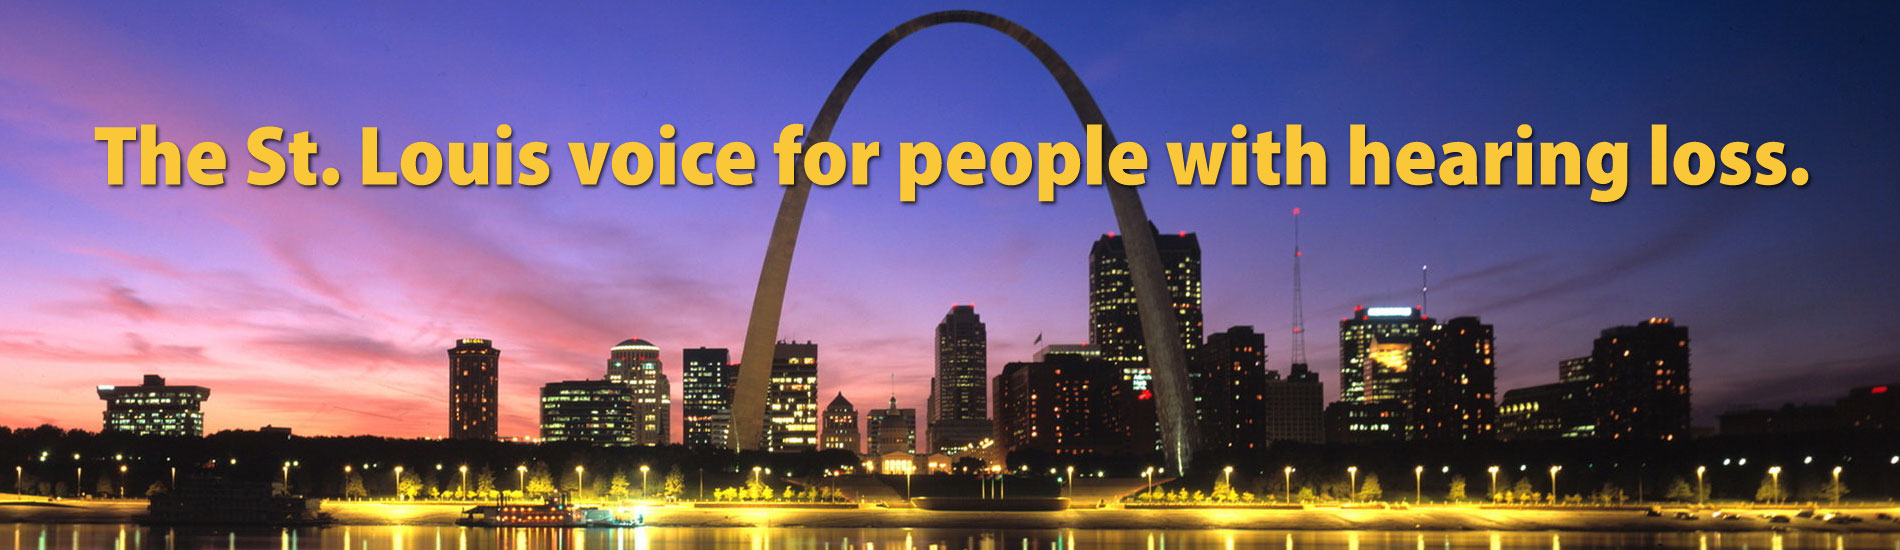 1 St. Louis Hearing Loss Voice